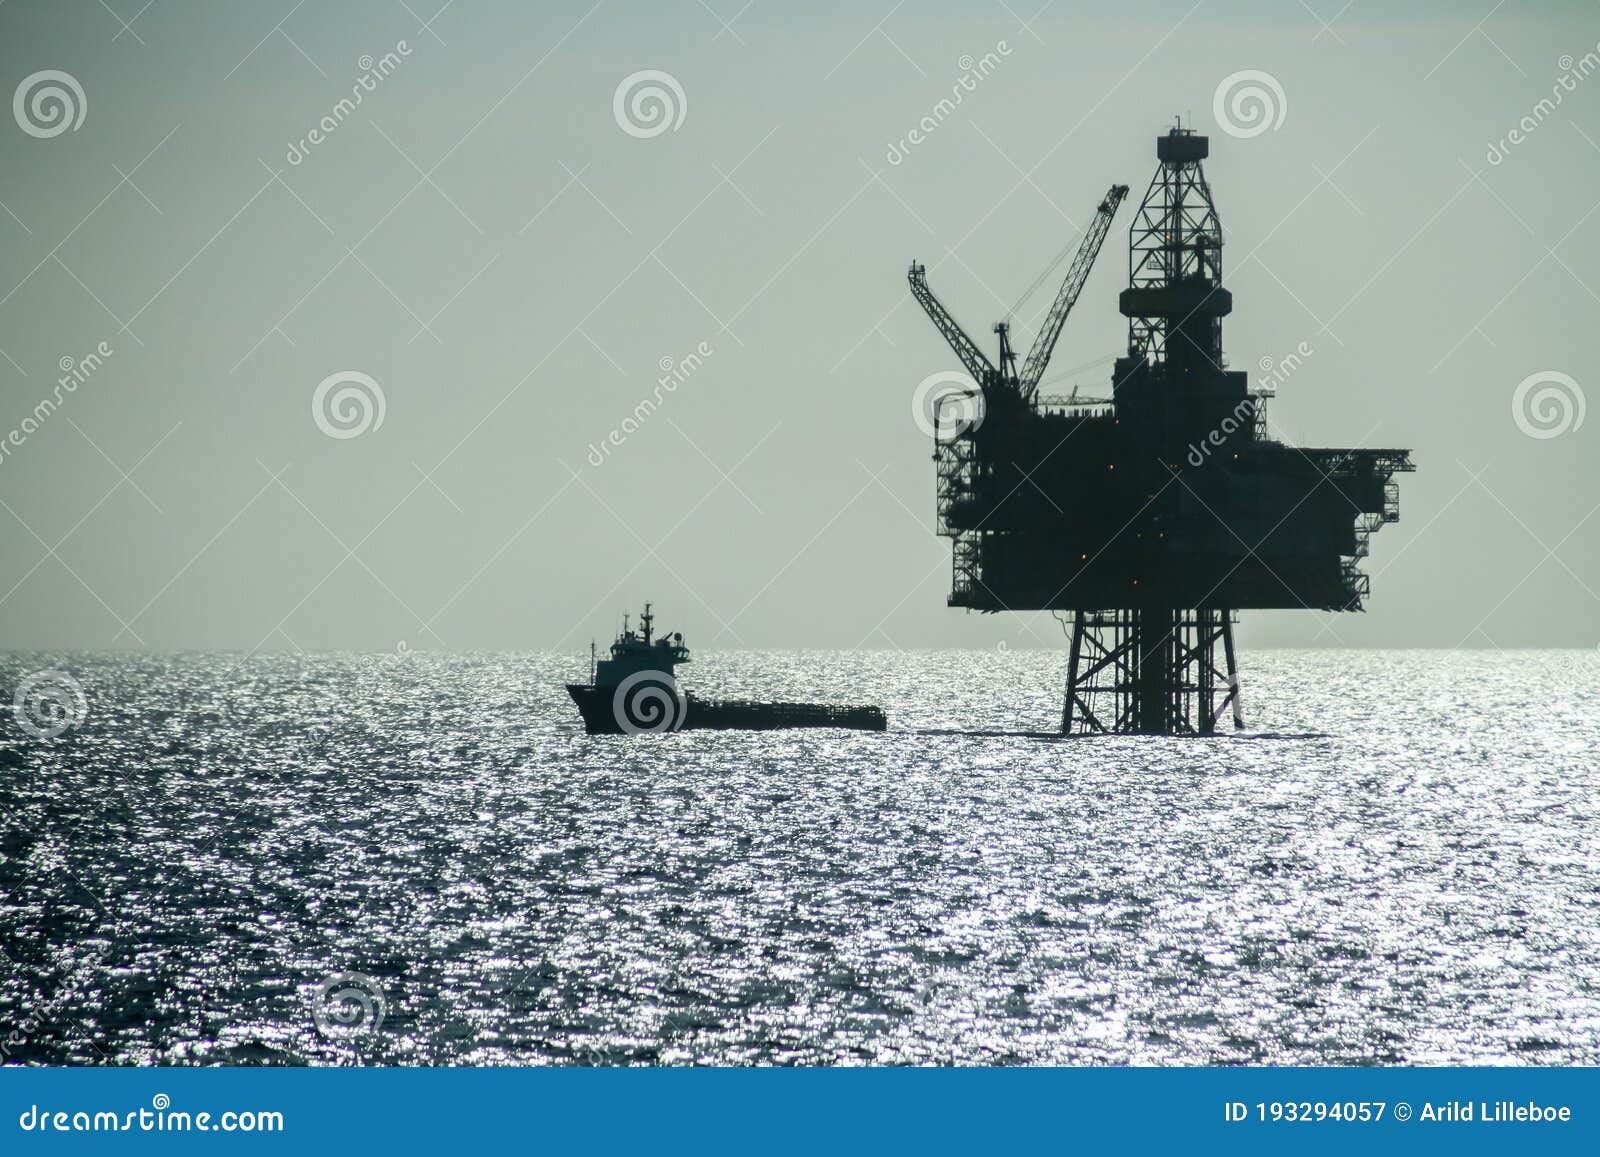 silhouette of an offshore supply vessel alongside oil platform ringhorn in the north sea